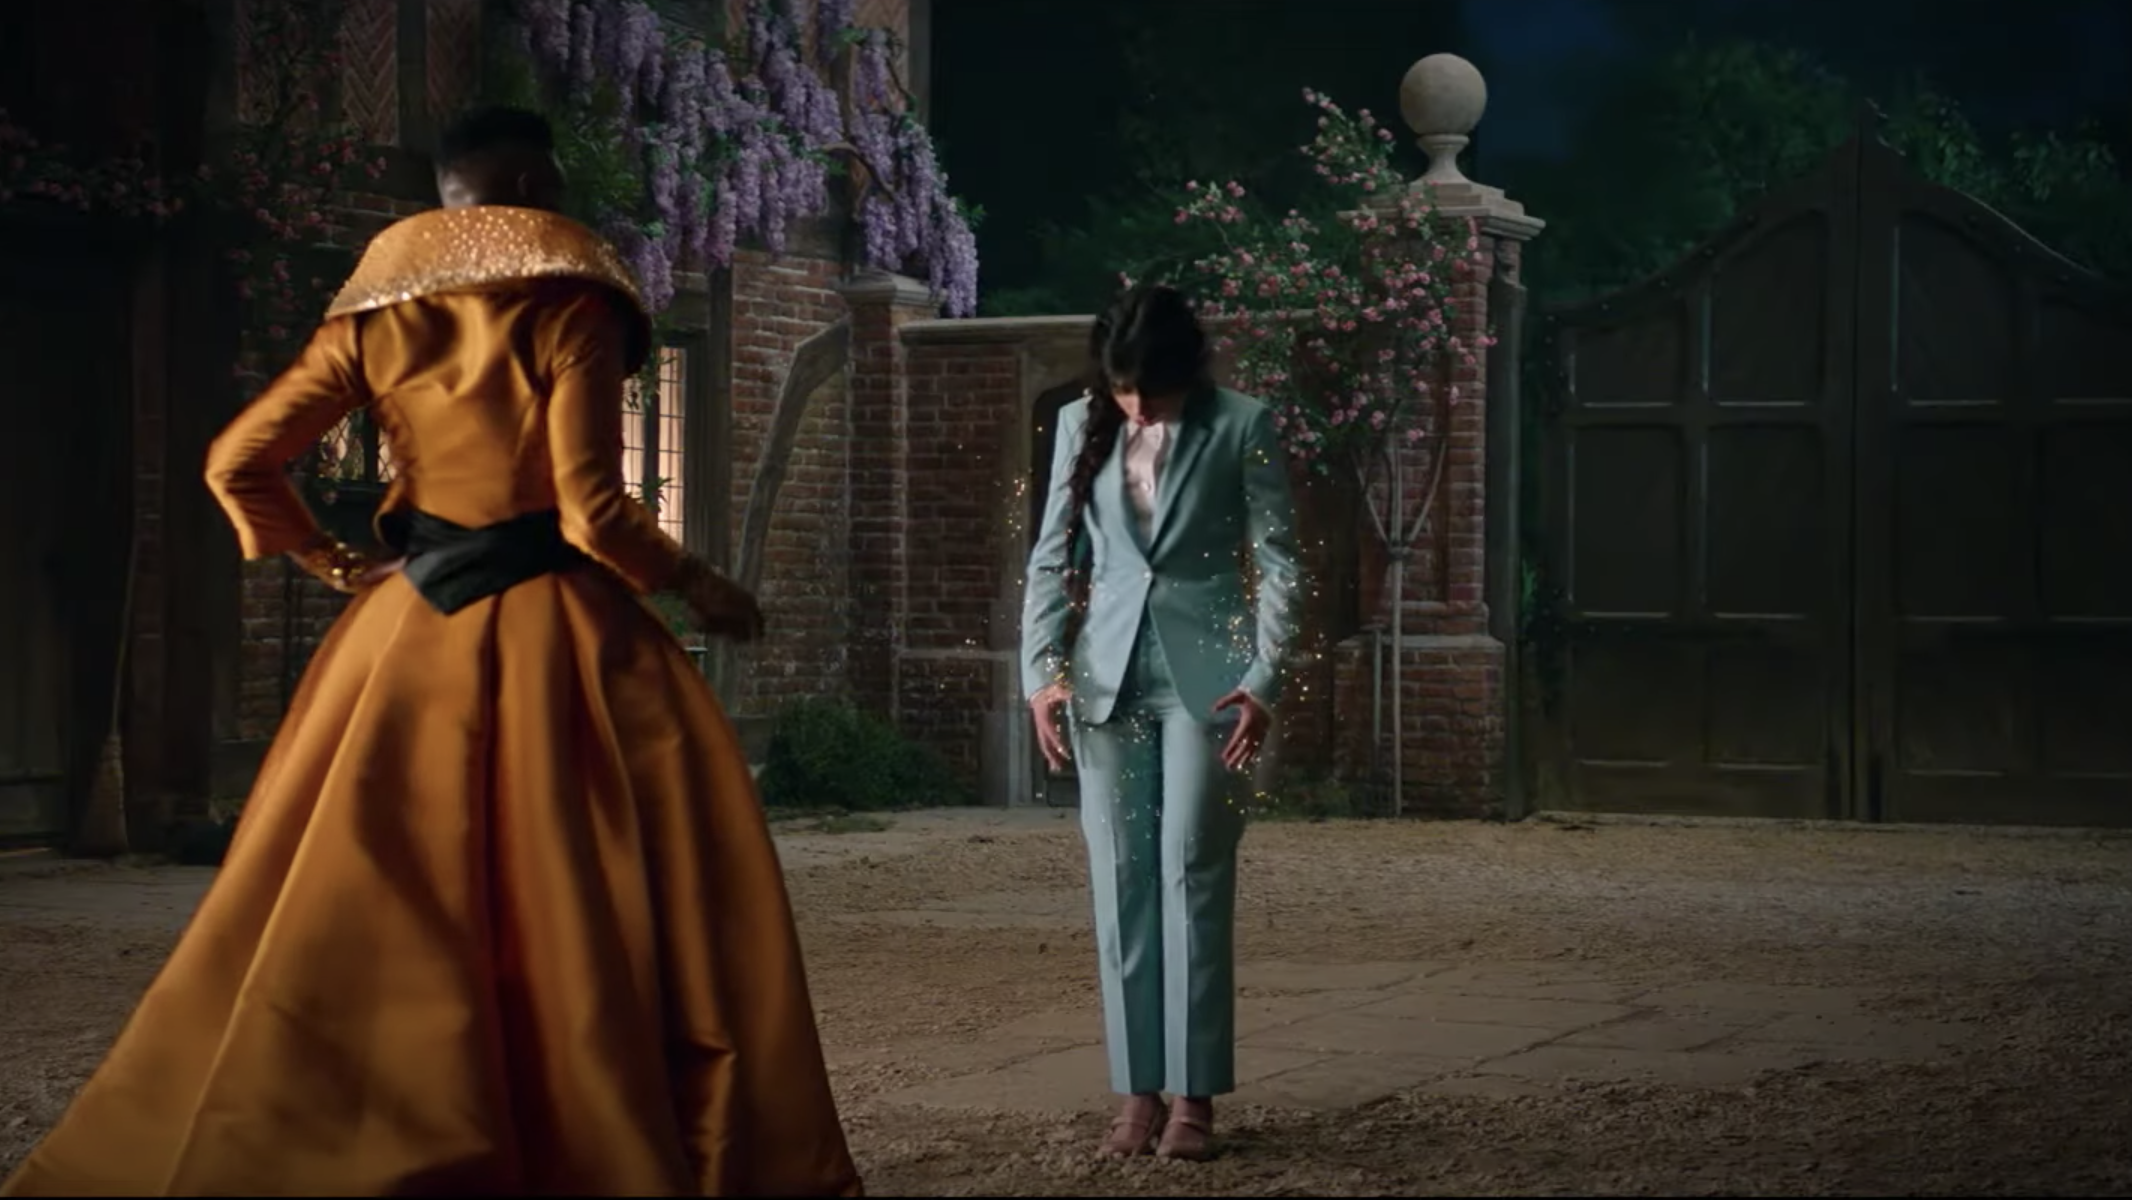 The girlbossification of Cinderella commences in the latest trailer for the Amazon Prime musical